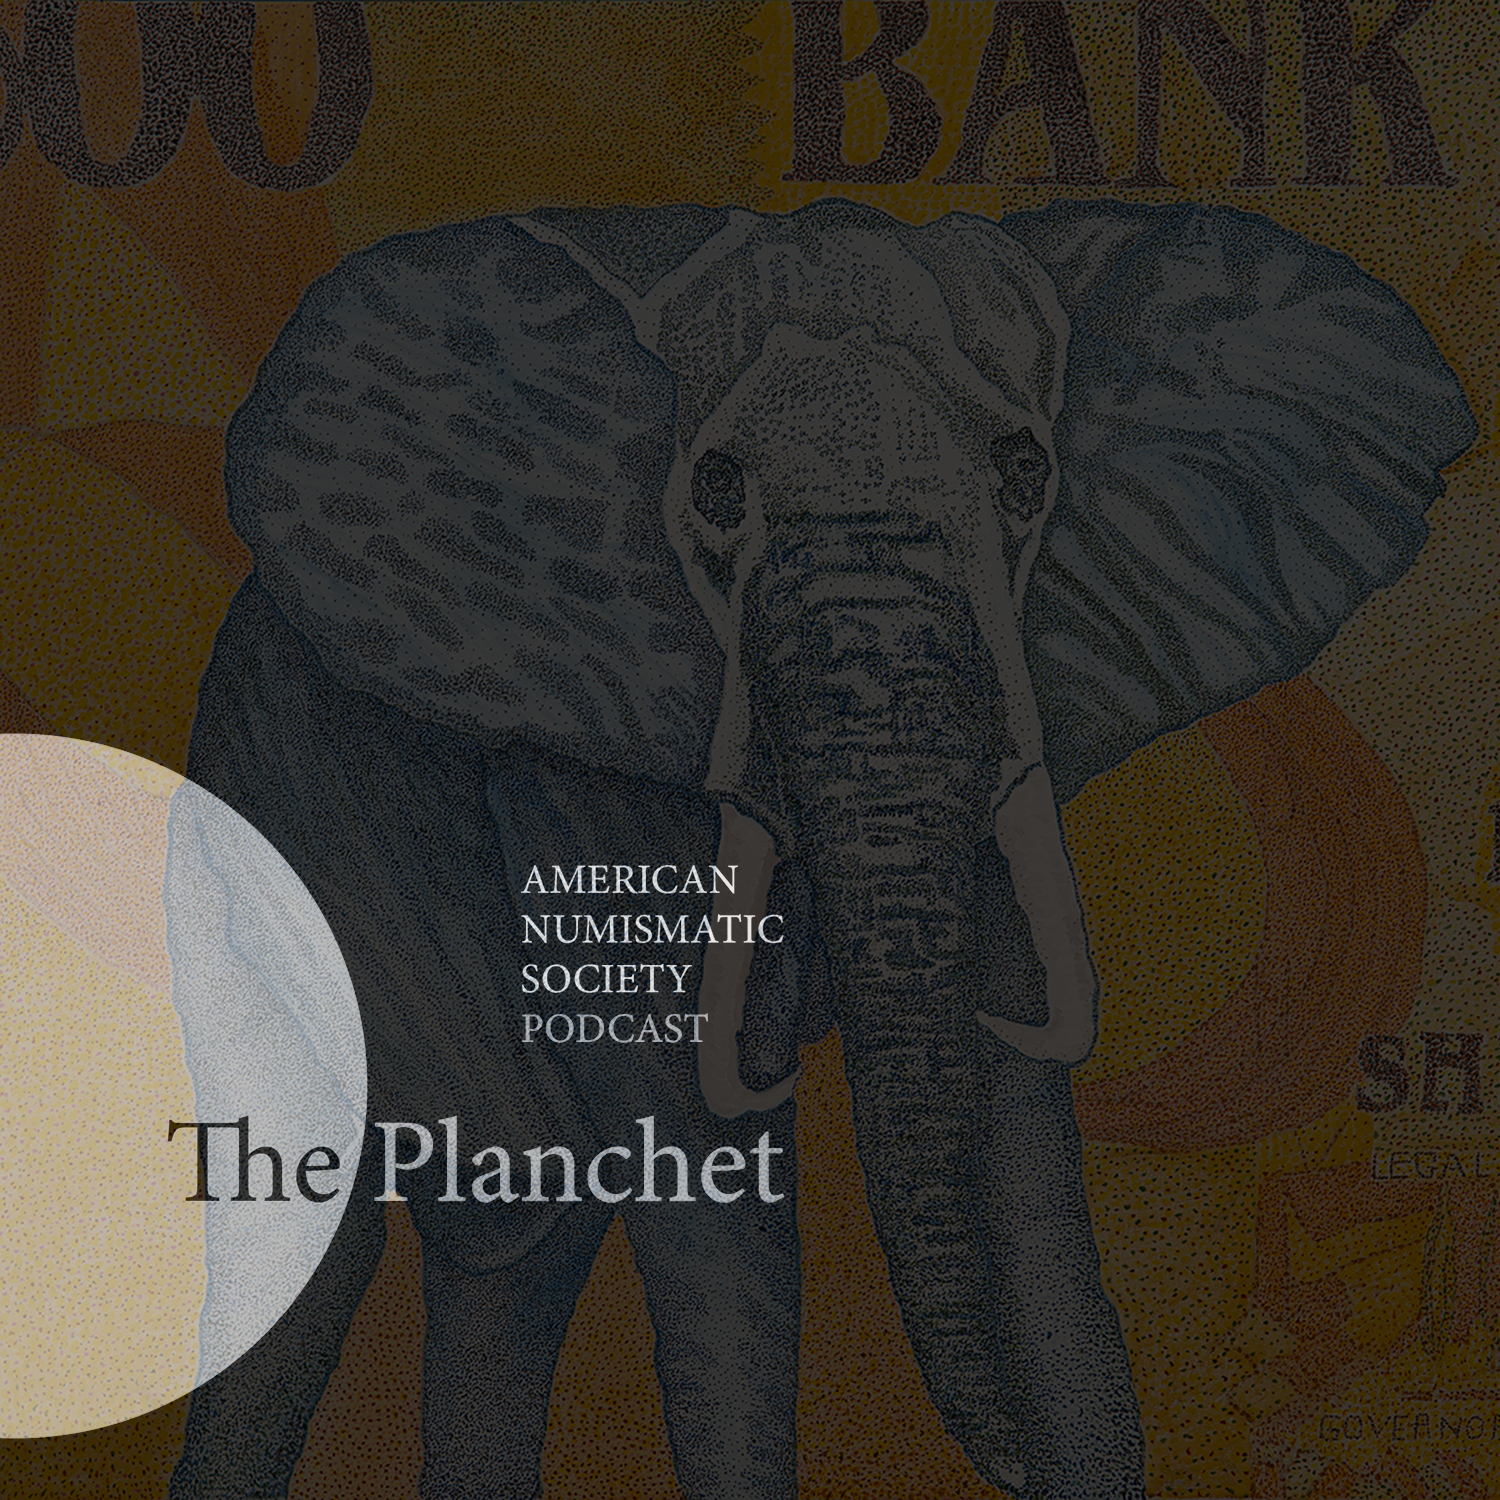 The Planchet, Season 1, Episode 5. An interview with numismatic visual artist Jenna Lash. Image: Endangered Species Series: African Elephant. Ugandan 500 shilling note. Acrylic on linen, 60" × 48".